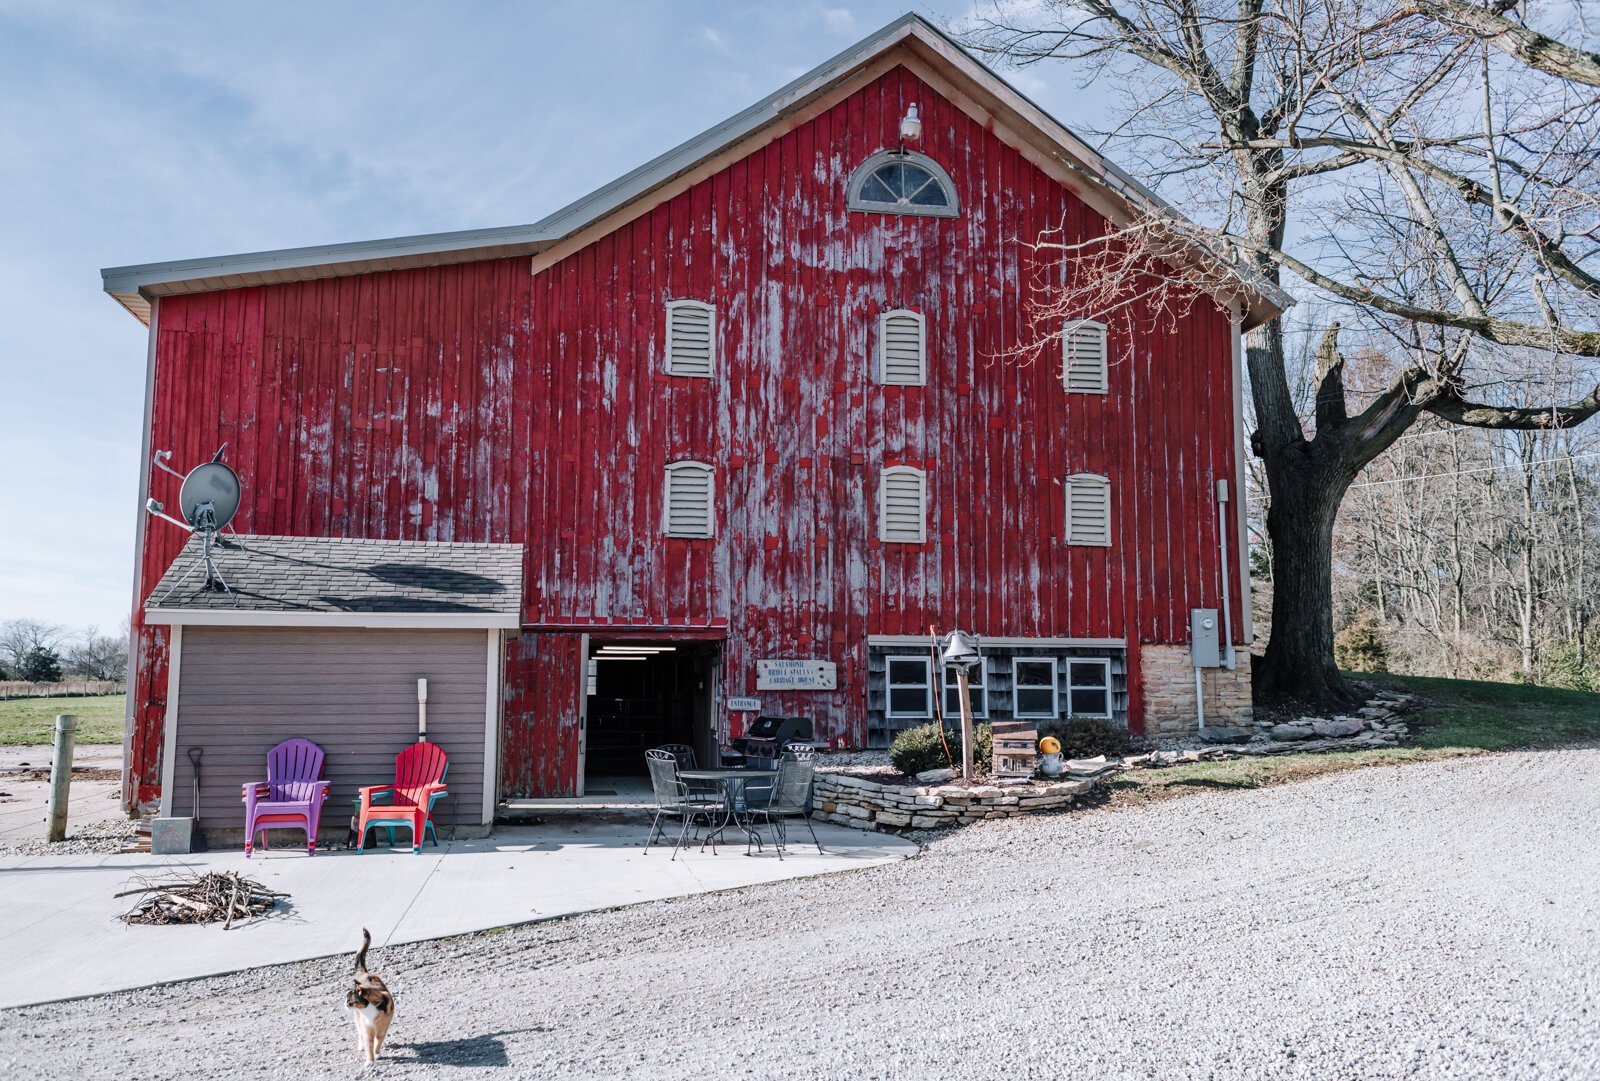 The Carriage House is a popular rustic loft getaway for Airbnb guests in Wabash County, located above a horse barn within walking distance of Salamonie State Park & Reservoir.